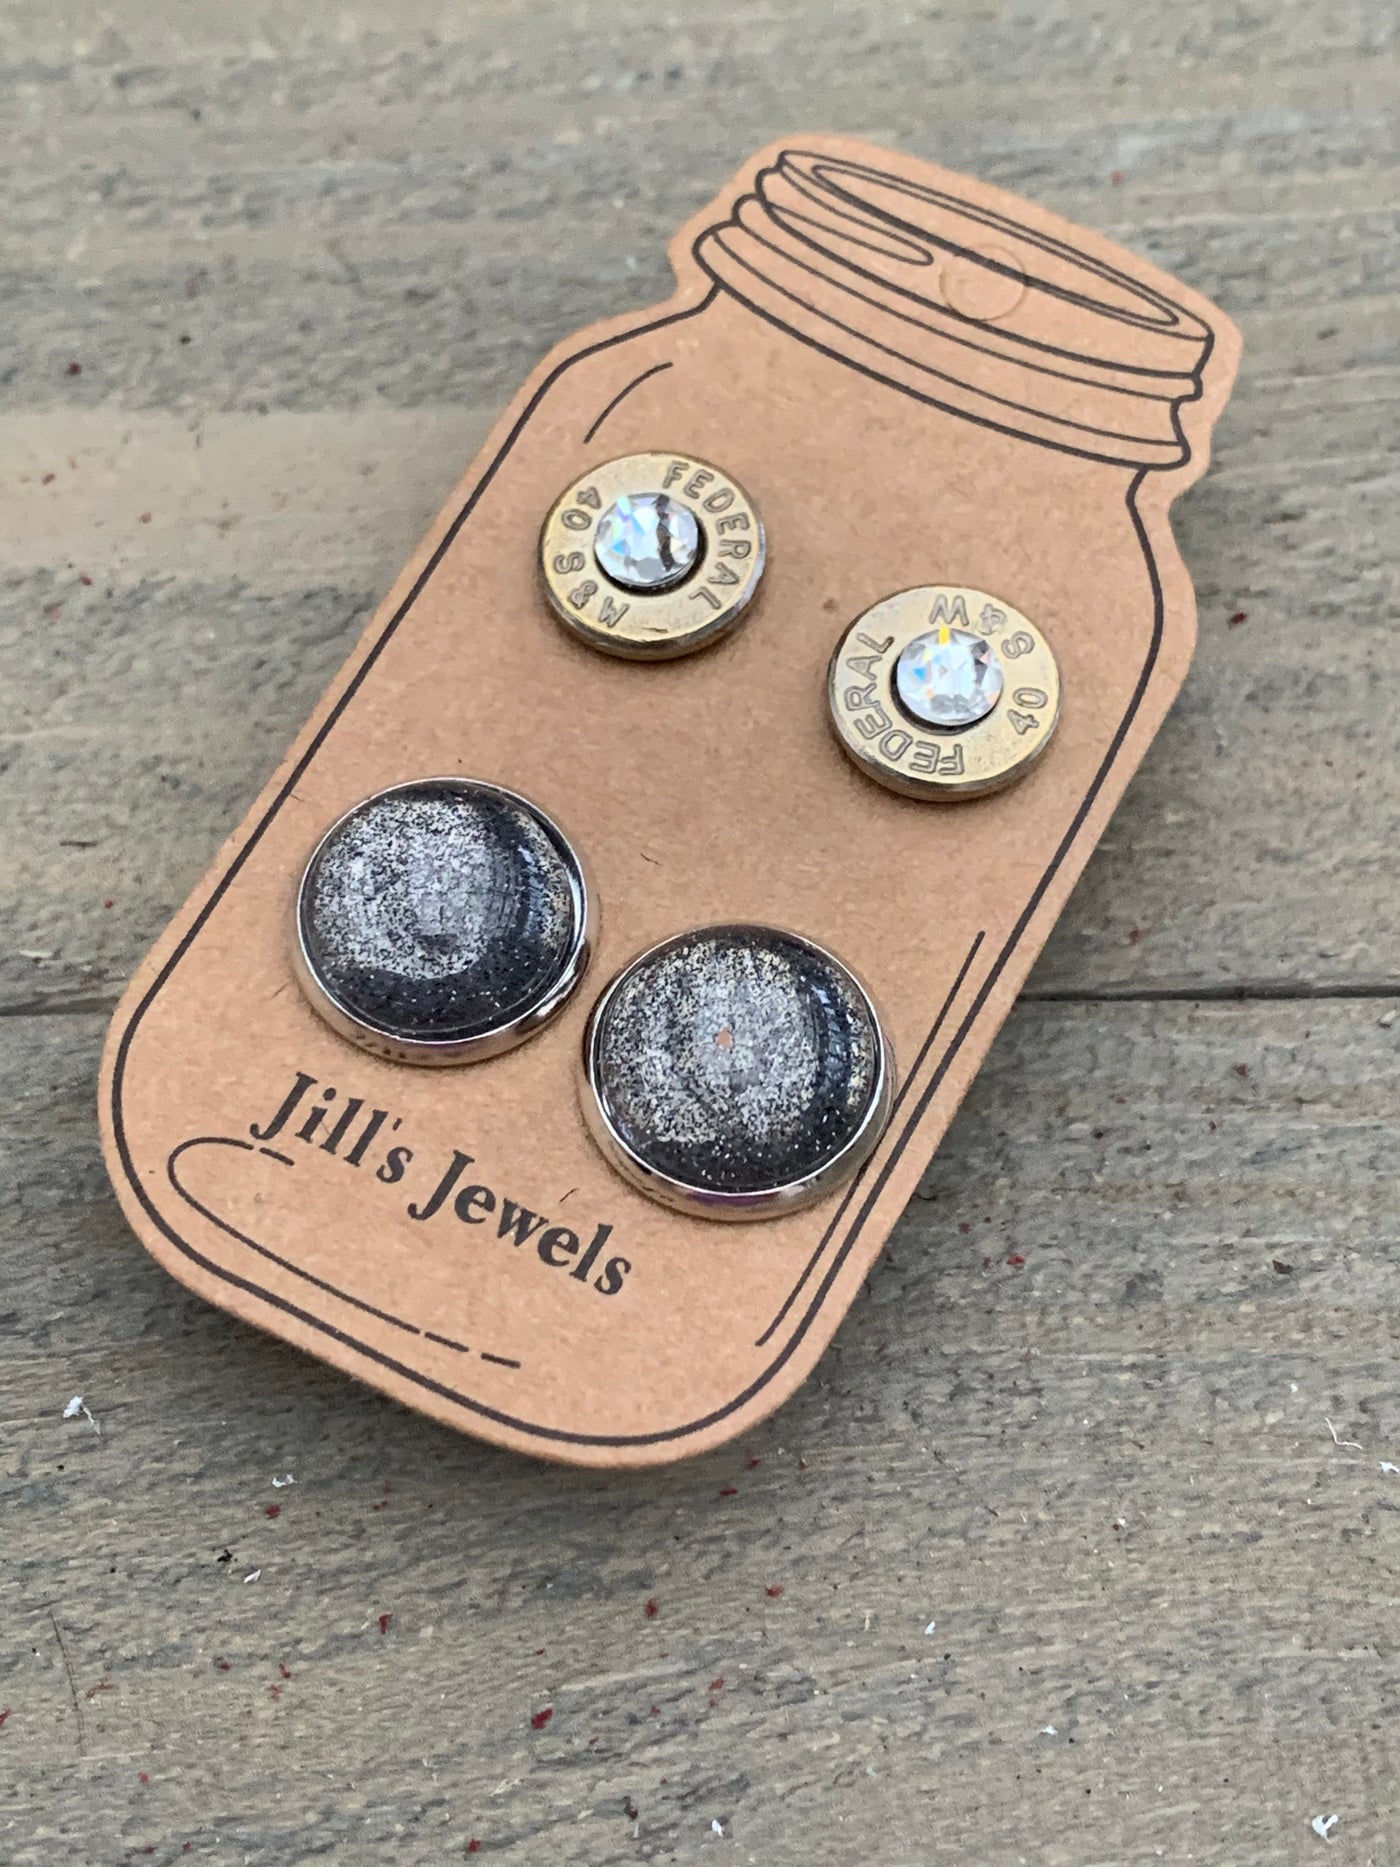 Grey Glitter 40 Caliber bullet earring set - Jill's Jewels | Unique, Handcrafted, Trendy, And Fun Jewelry